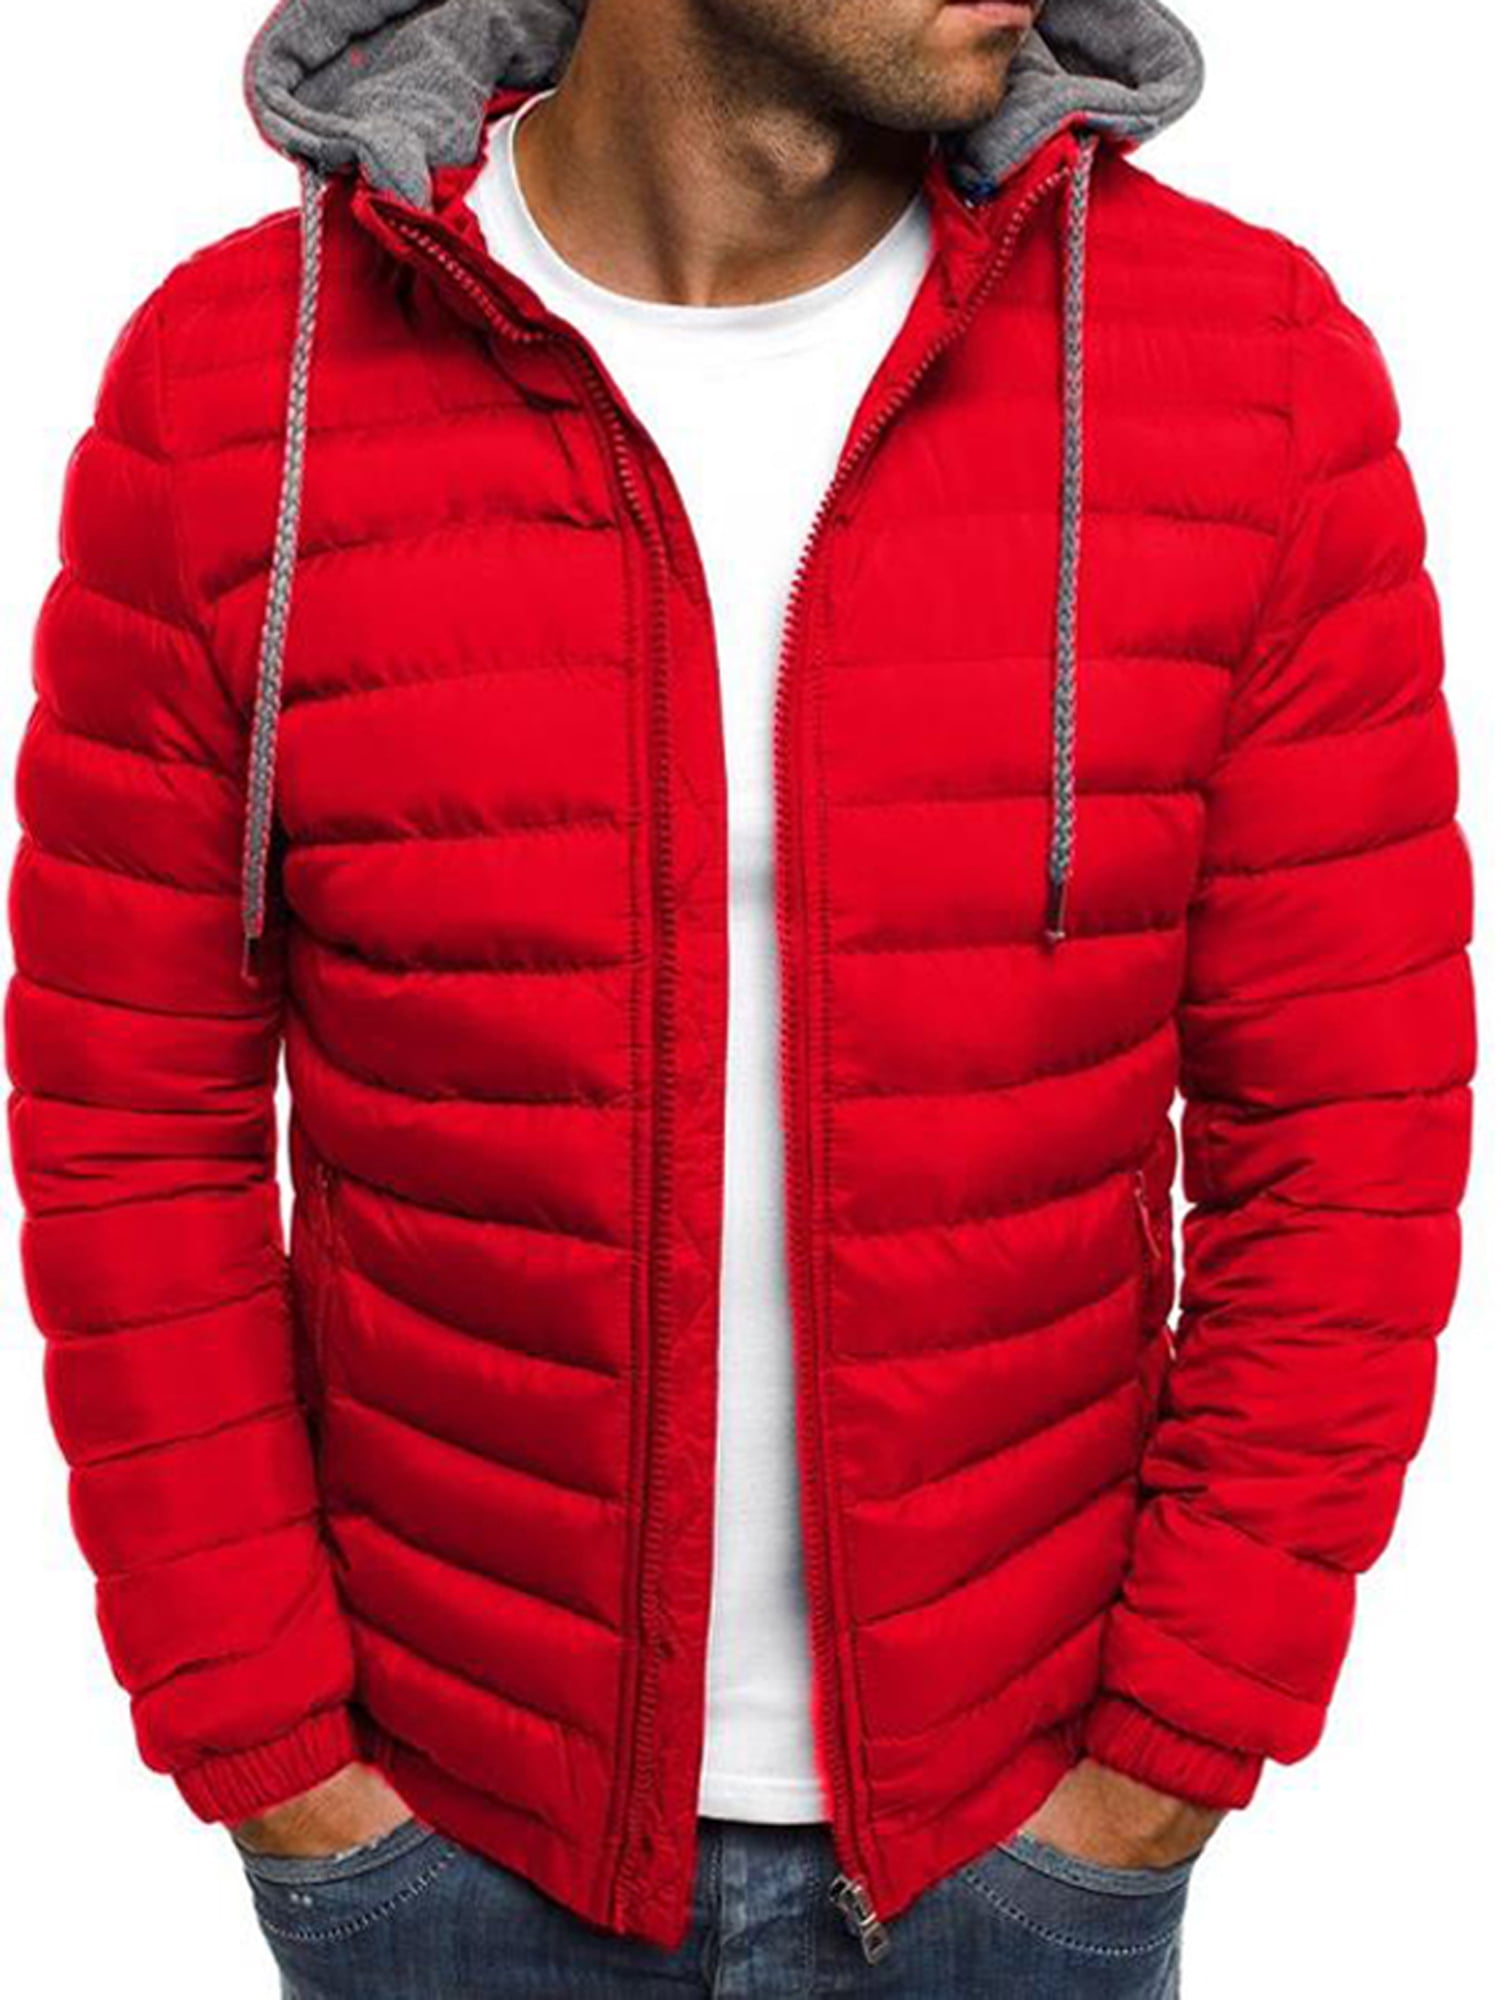 Men's Puffer Bubble Down Coat Quilted Padded Winter Warm Jacket Hooded Outwear